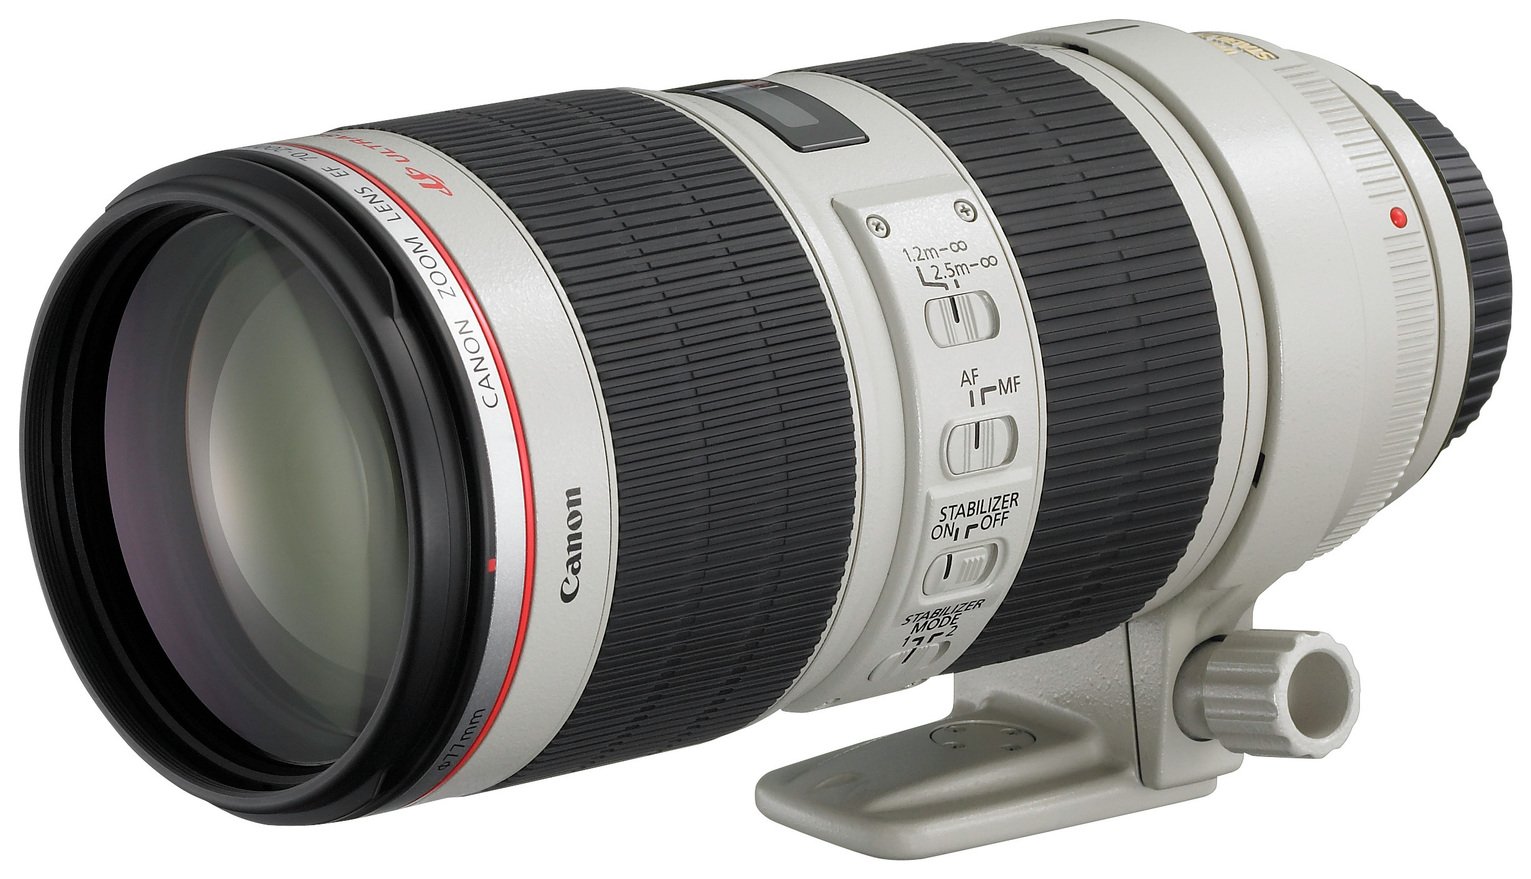 Canon EF 70-200mm f/2.8 L IS II USM Lens Review